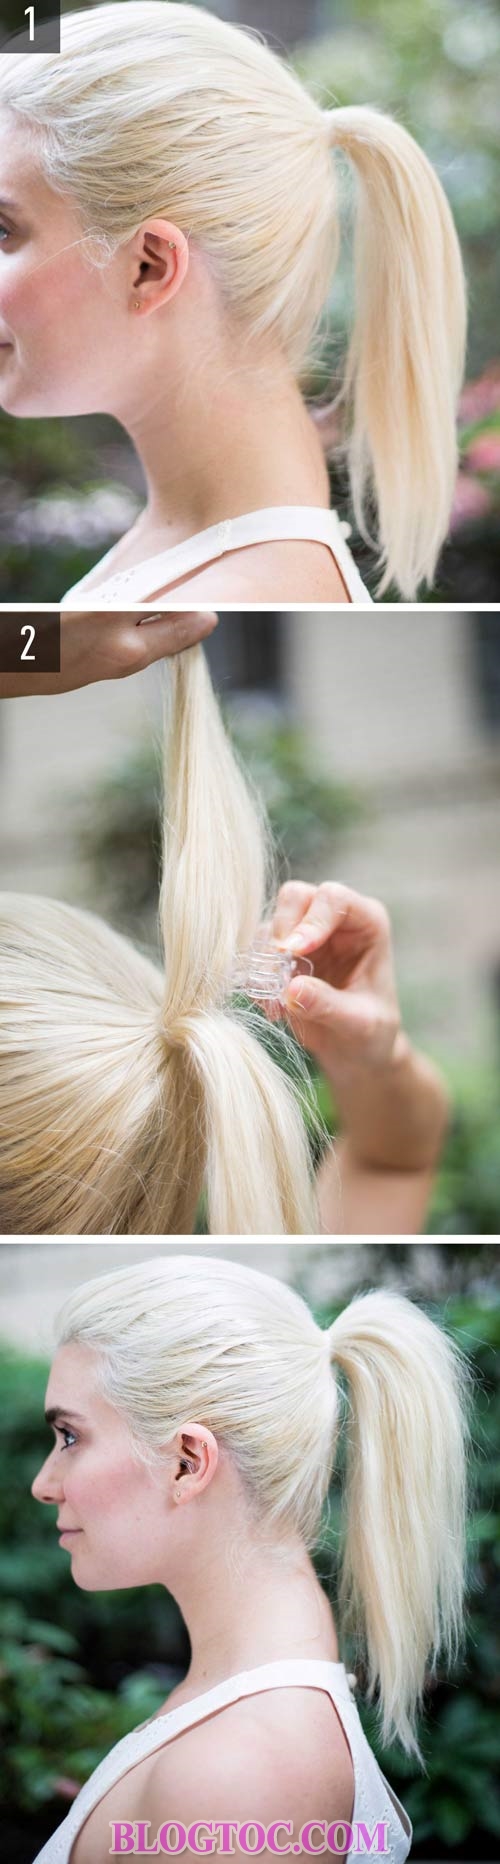 Simple beautiful hairstyles you can make at home with just a little free time 11